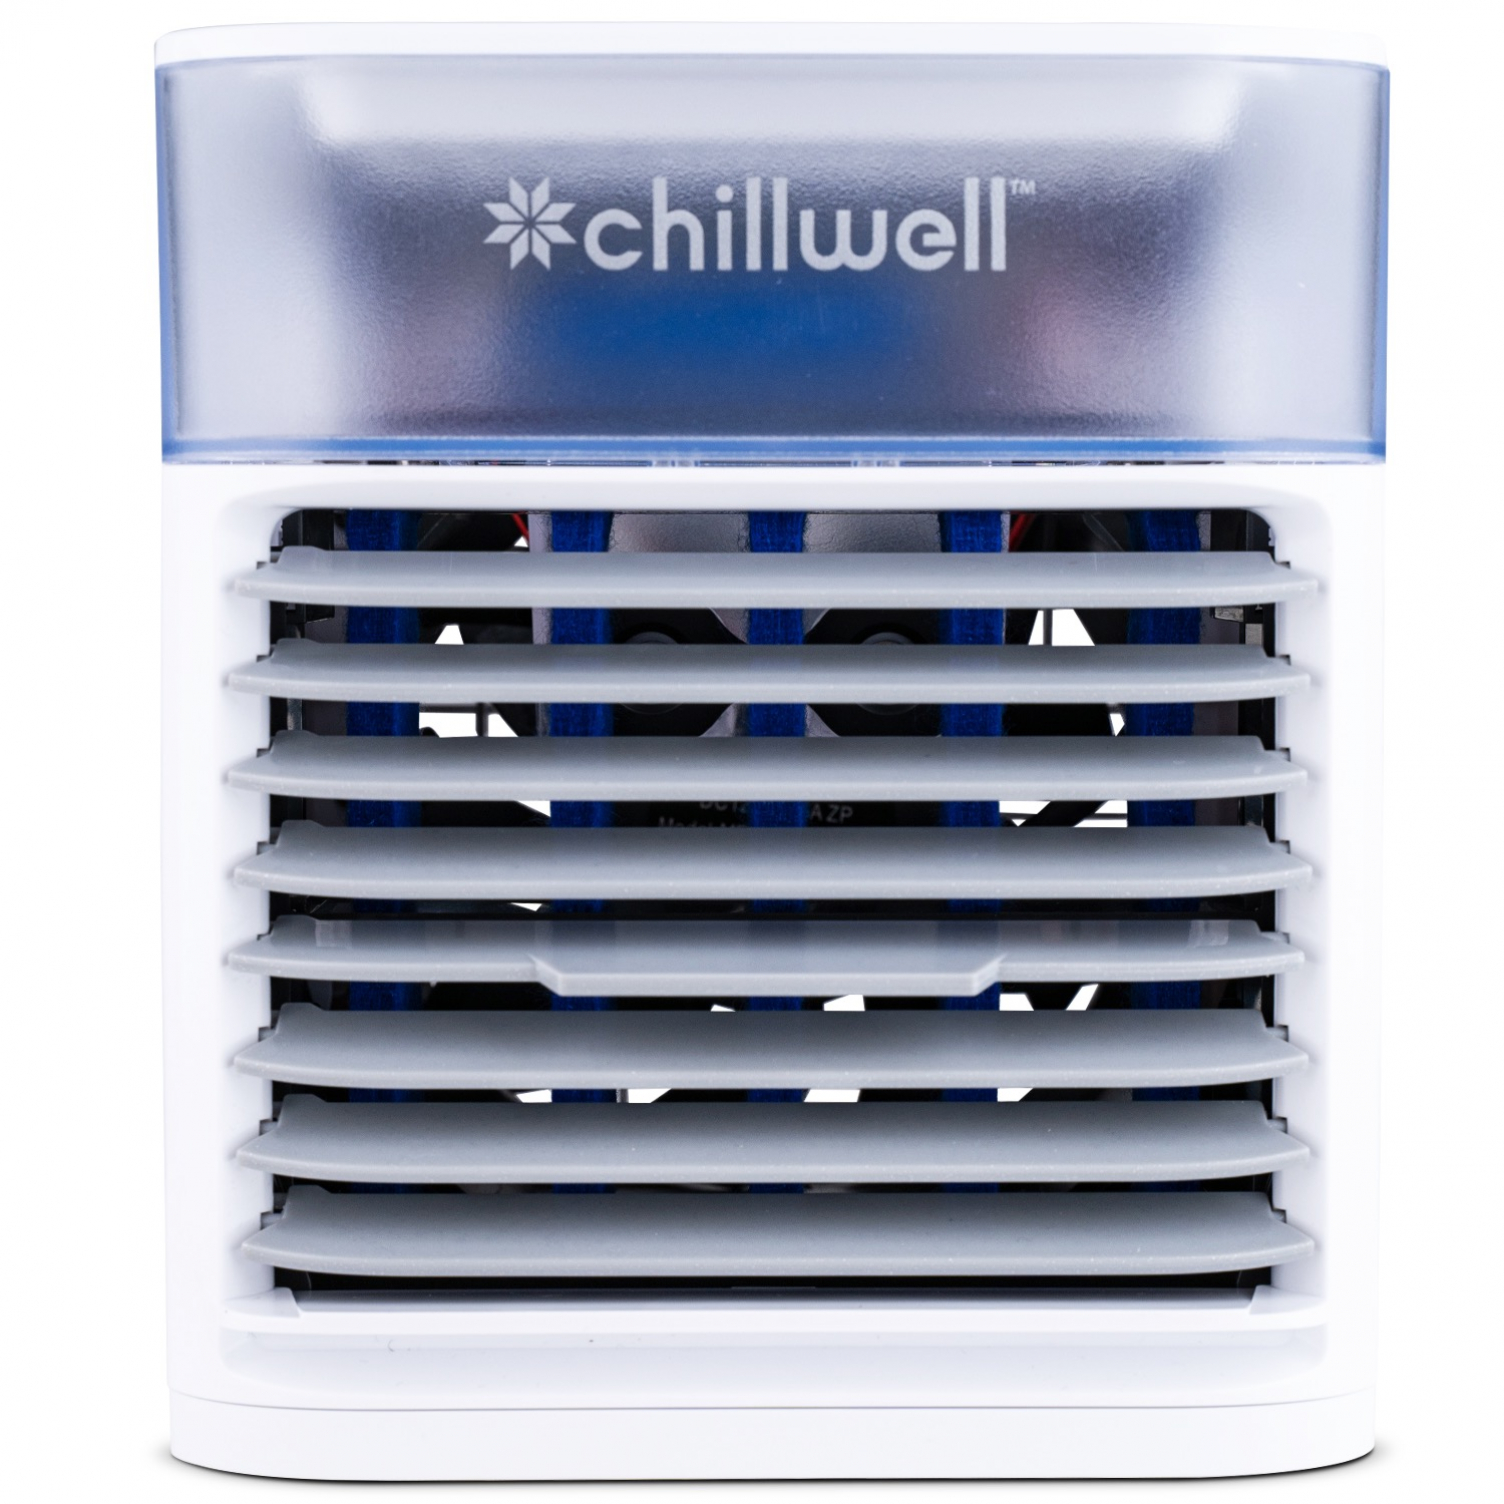 Where Can I Buy A Chillwell Ac